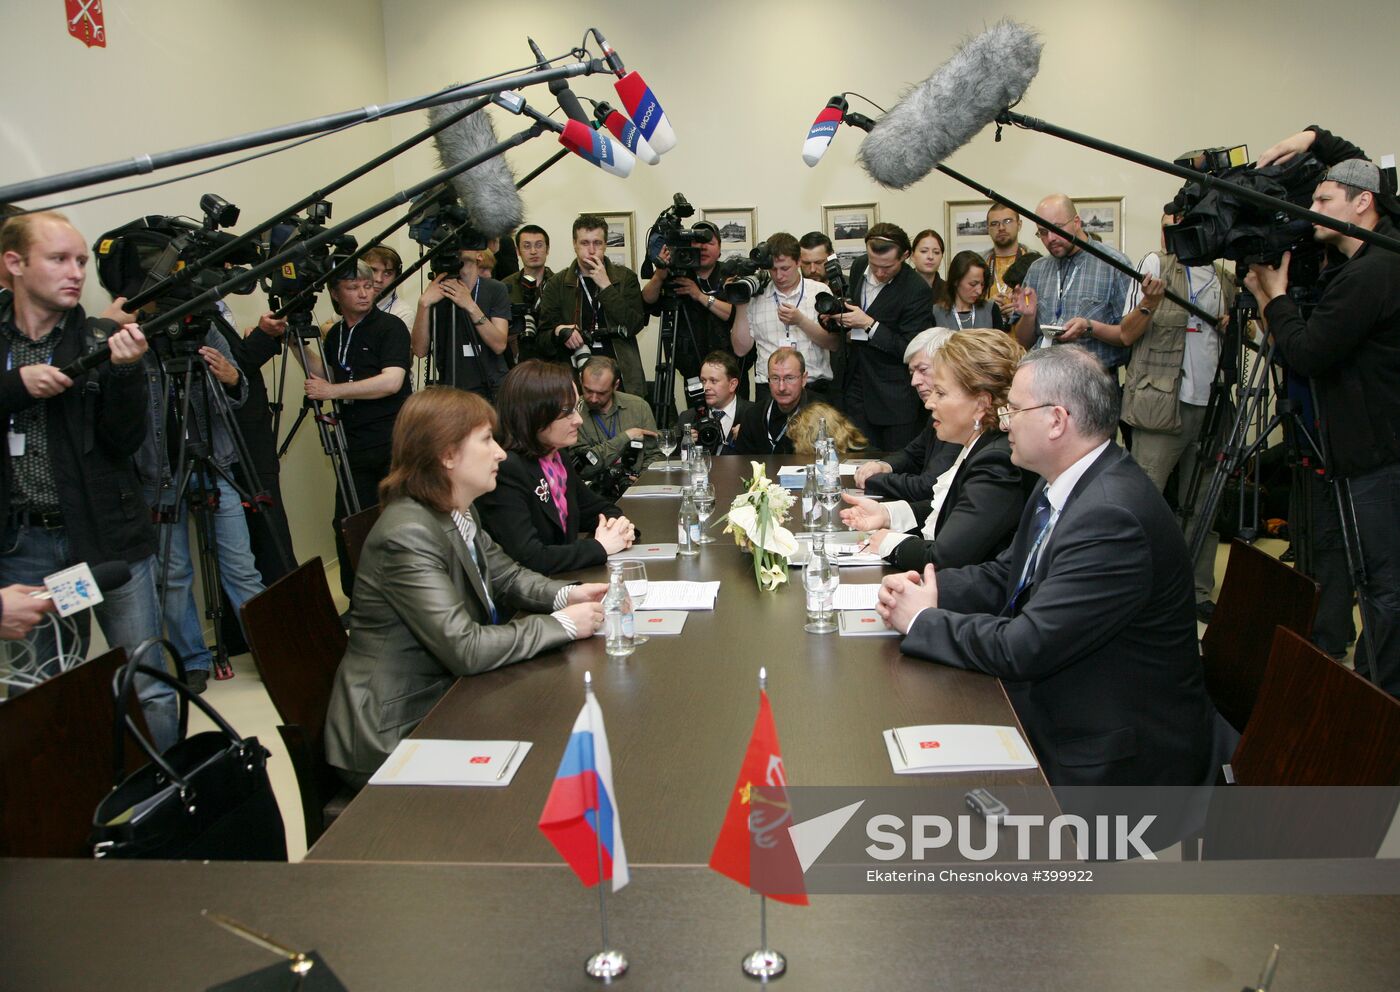 Signing of agreement between Intel and St. Petersburg government